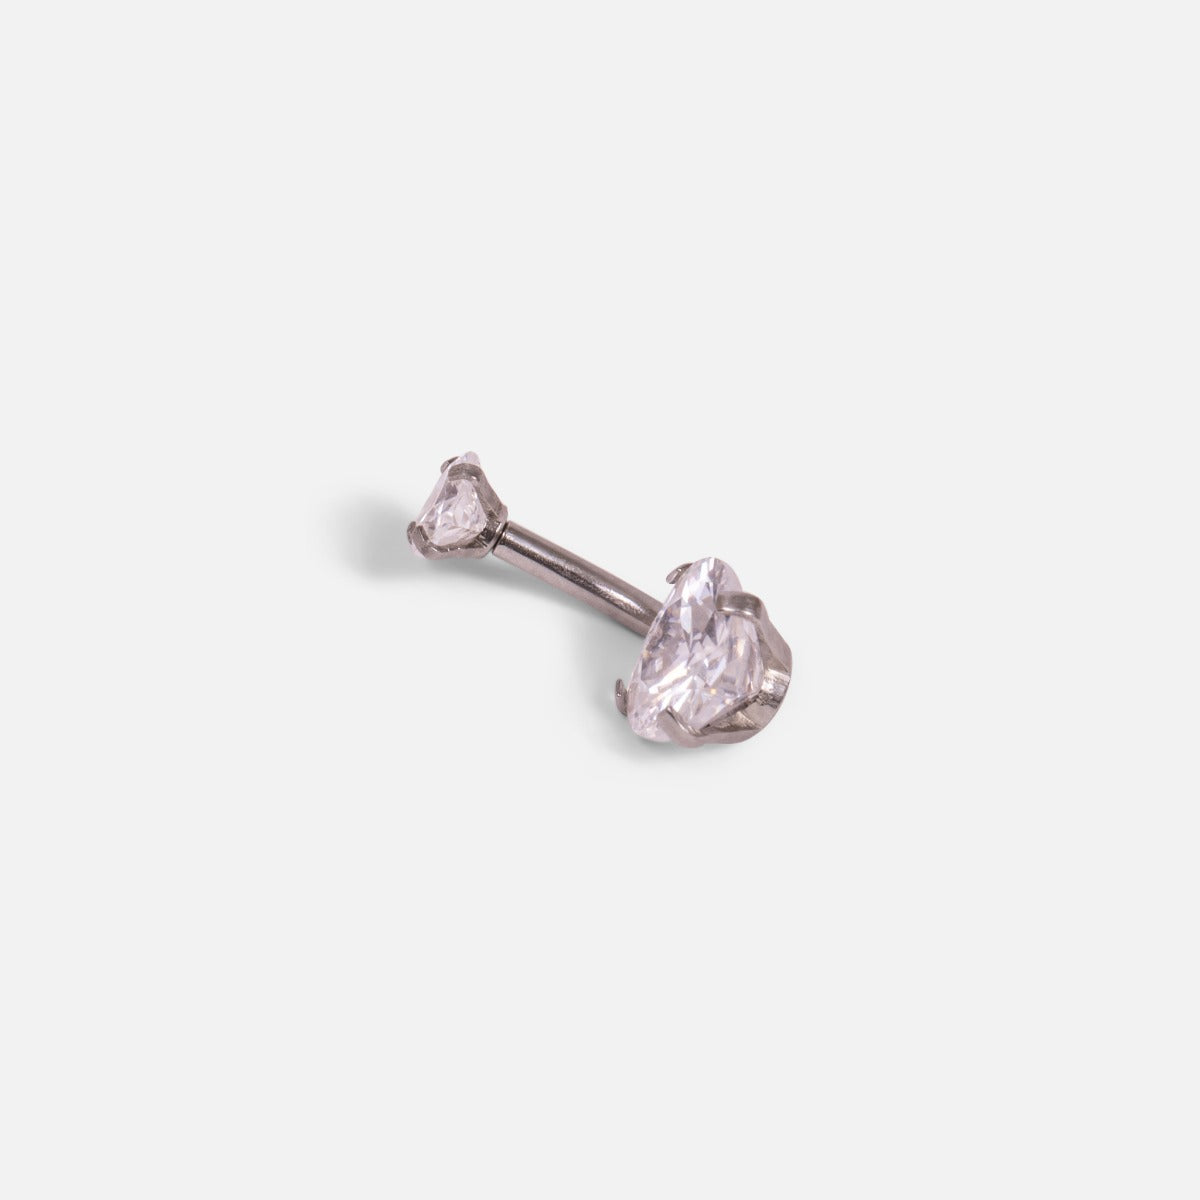 Stainless steel belly button ring with heart cubic zirconia